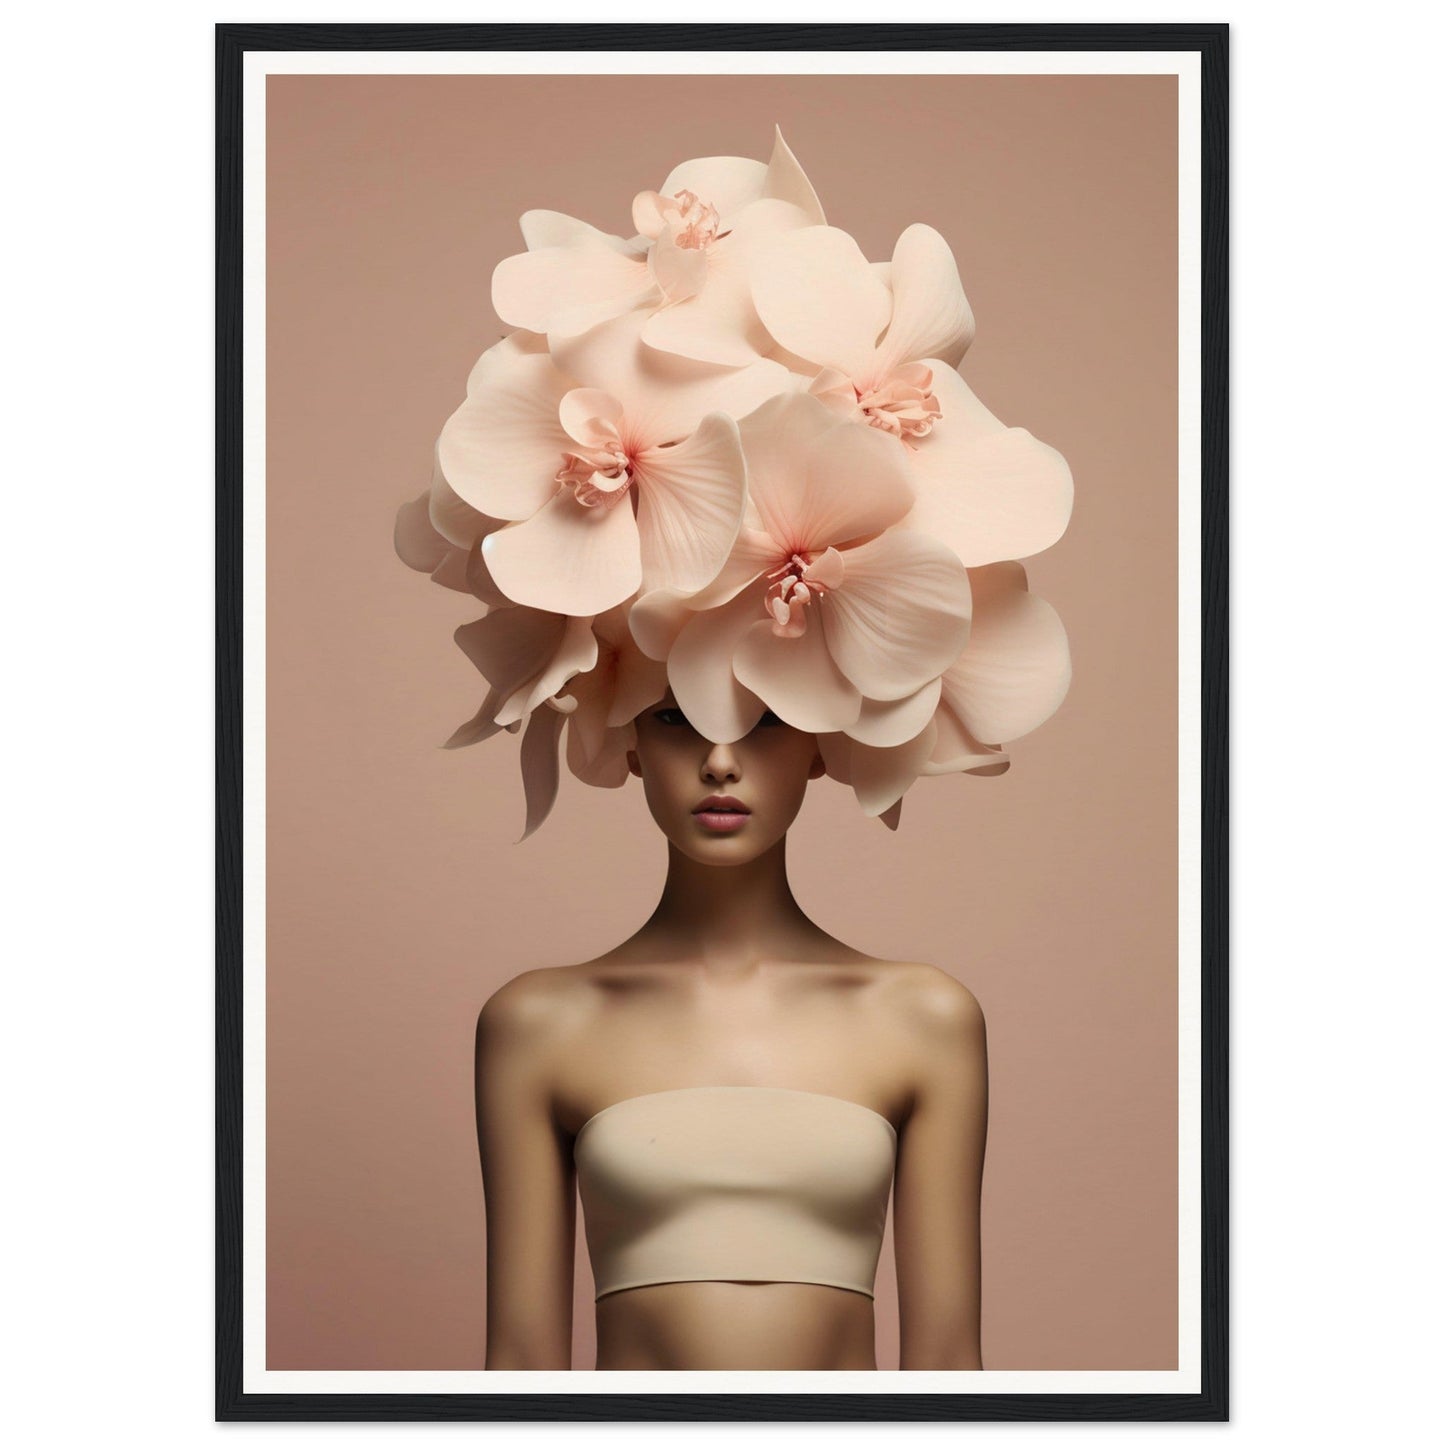 Flower head #14 the oracle windows™ collection - 50x70 cm /